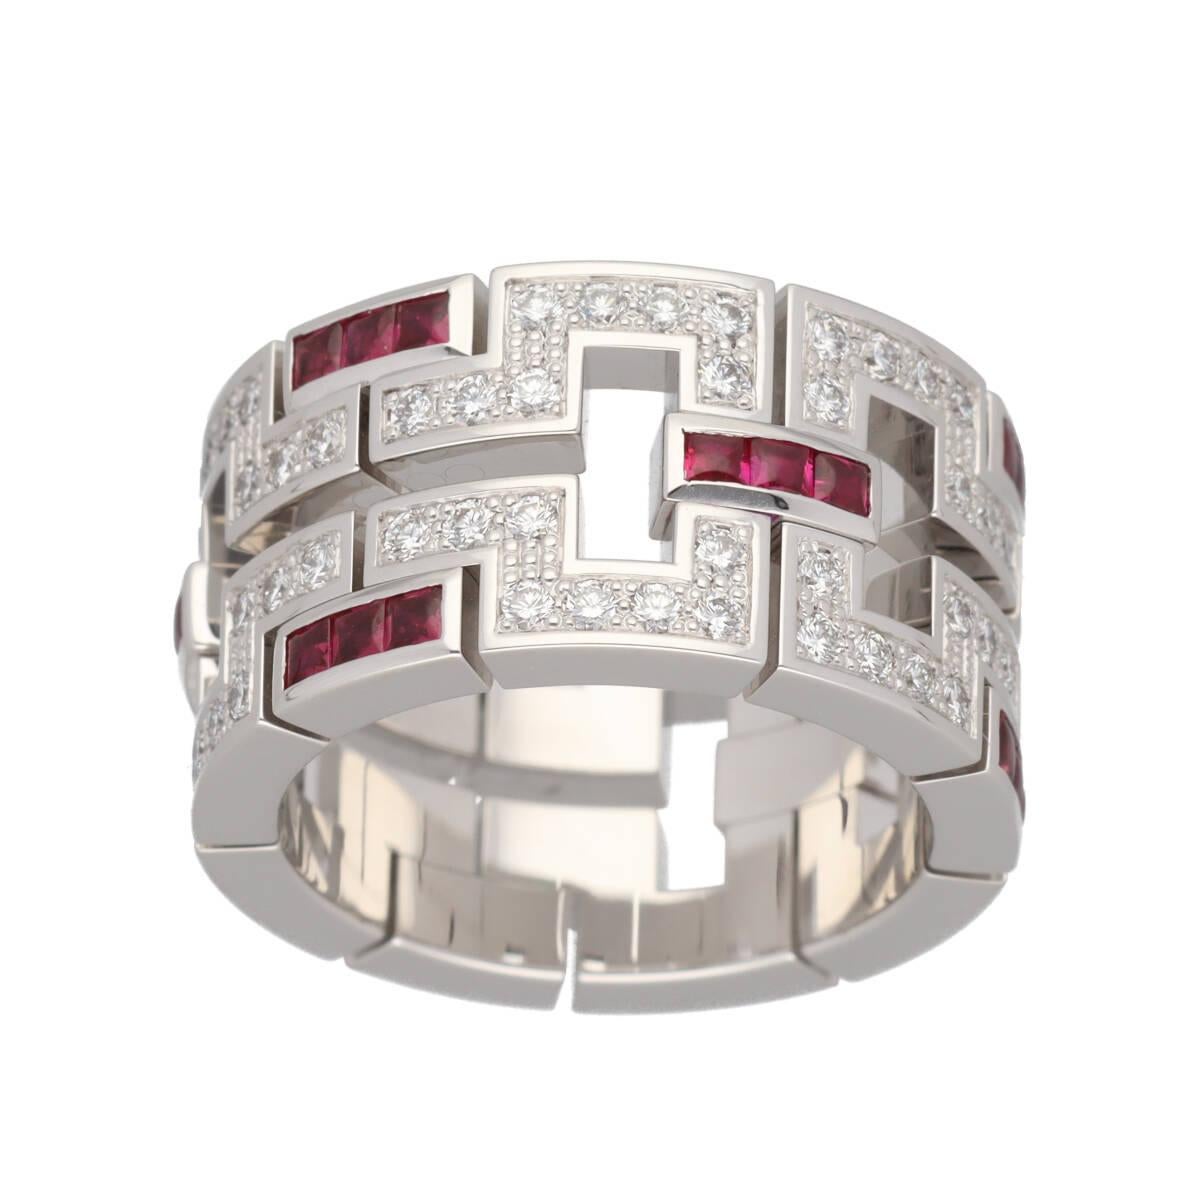 ■ Product Number: 23250538
■ Brand: Cartier
■ Product Name: Dragon Padlock Ring
■ Material: Diamond, Ruby, 750 K18 WG White Gold
■ Weight: Approx. 16.3g
■ Ring Size: Approx. EU: 51 / USA：5 1/2
■ Width: Approx. 11.06mm
■ Accessories: Cartier box,